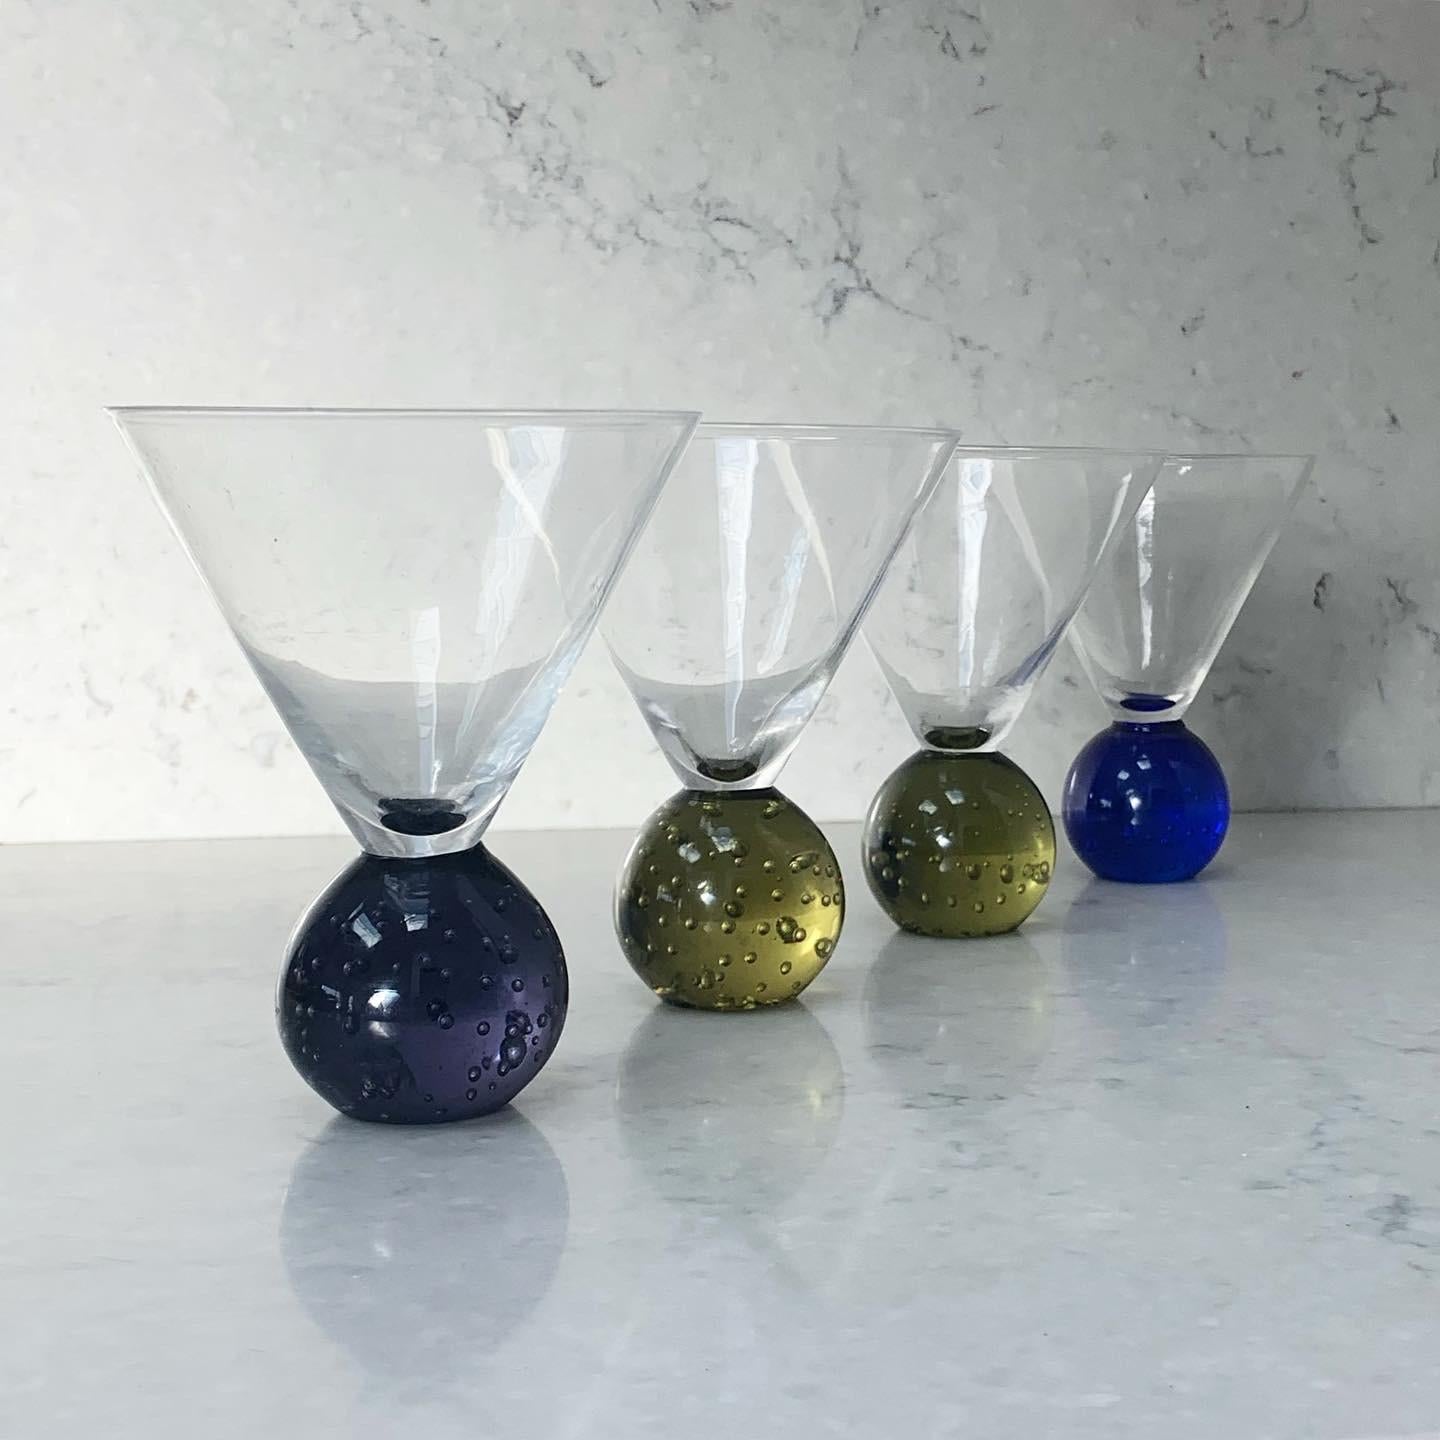 Set of 4 postmodern martini glasses with sphère base. 1 amethyst, 1 YvesKleinBlue, 2 olives. A rare set. Flawless. Cheers!
Measures: 5.25” tall.